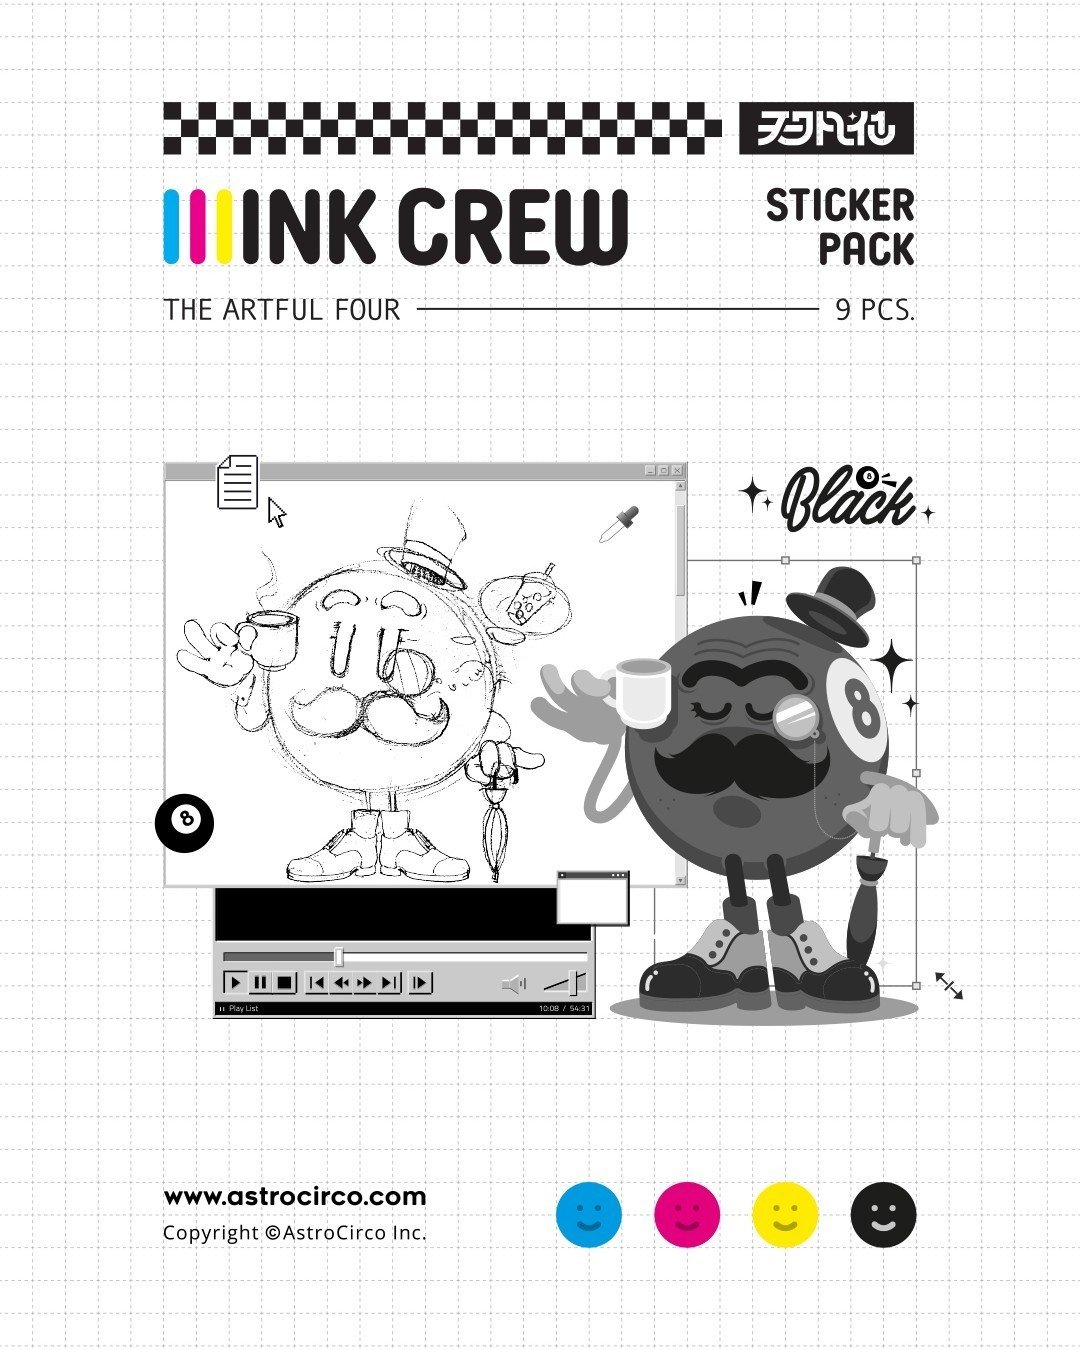 Introducing our last ink crew member, Mr.BLACK. 😎 Explore our INK CREW CMYK sticker pack, printed using 100% pure CMYK colors. Find it on our online shop or visit @mrsurprisetoys THE WELL location.✌️👀
.
.
.
#characterdesign #CMYK #black #inkcrew #a